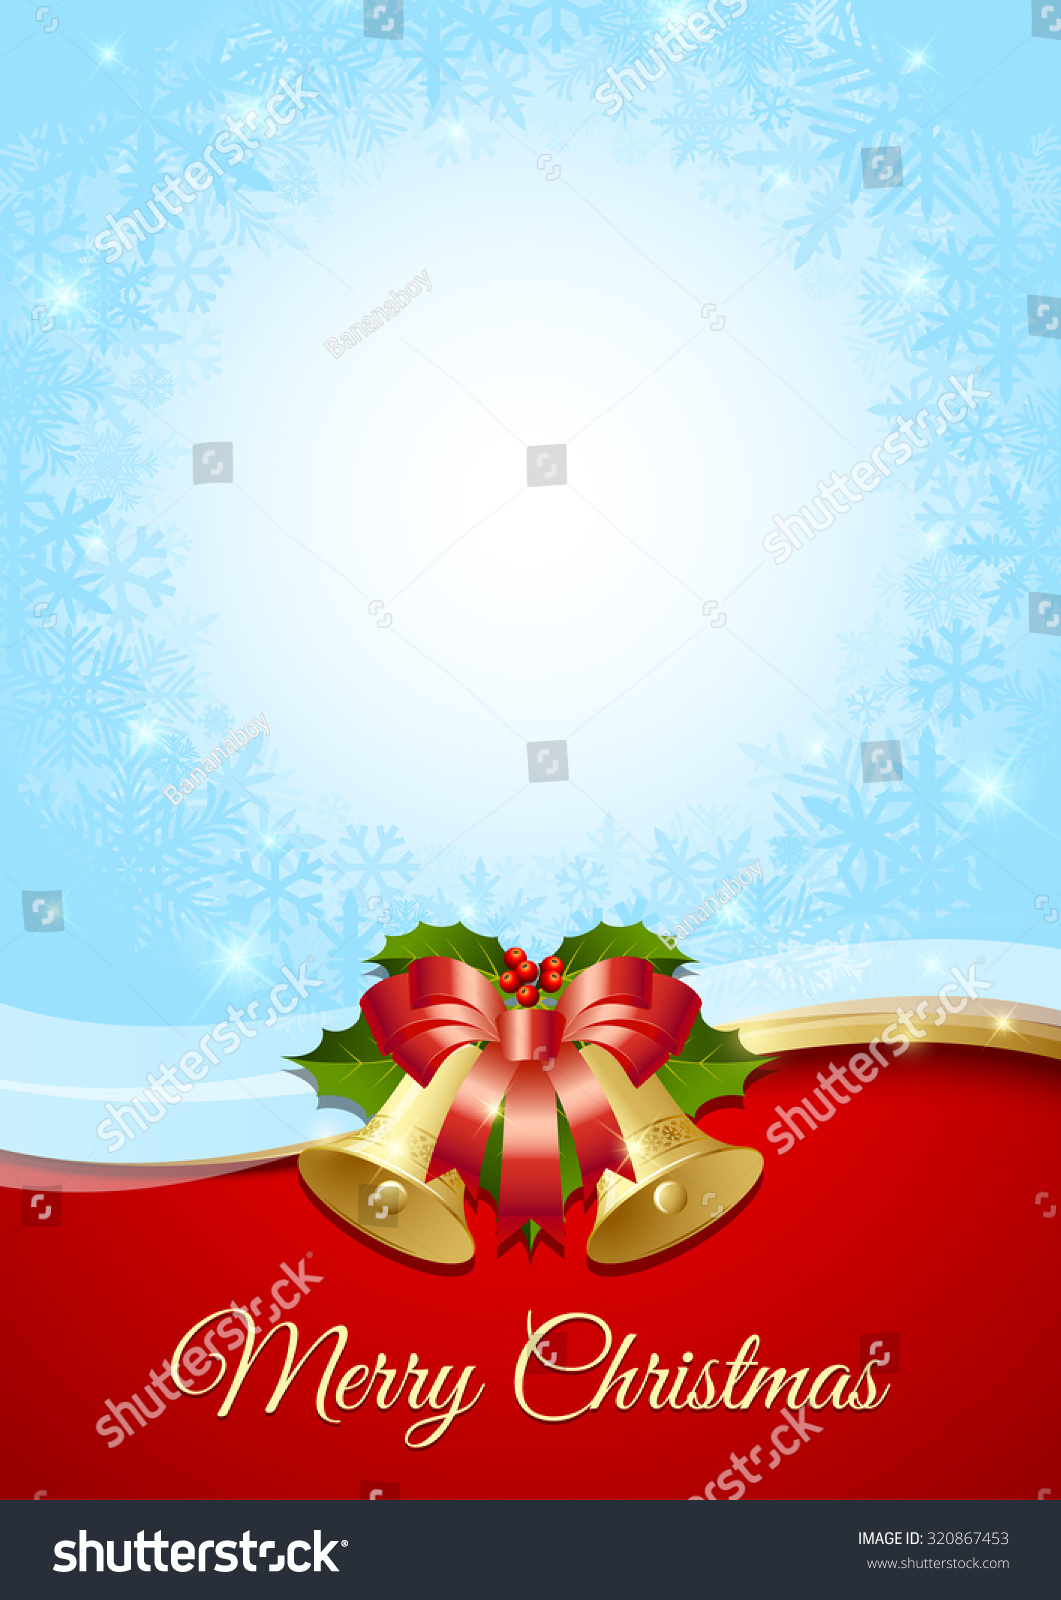 merry-christmas-document-template-traditional-bells-stock-vector